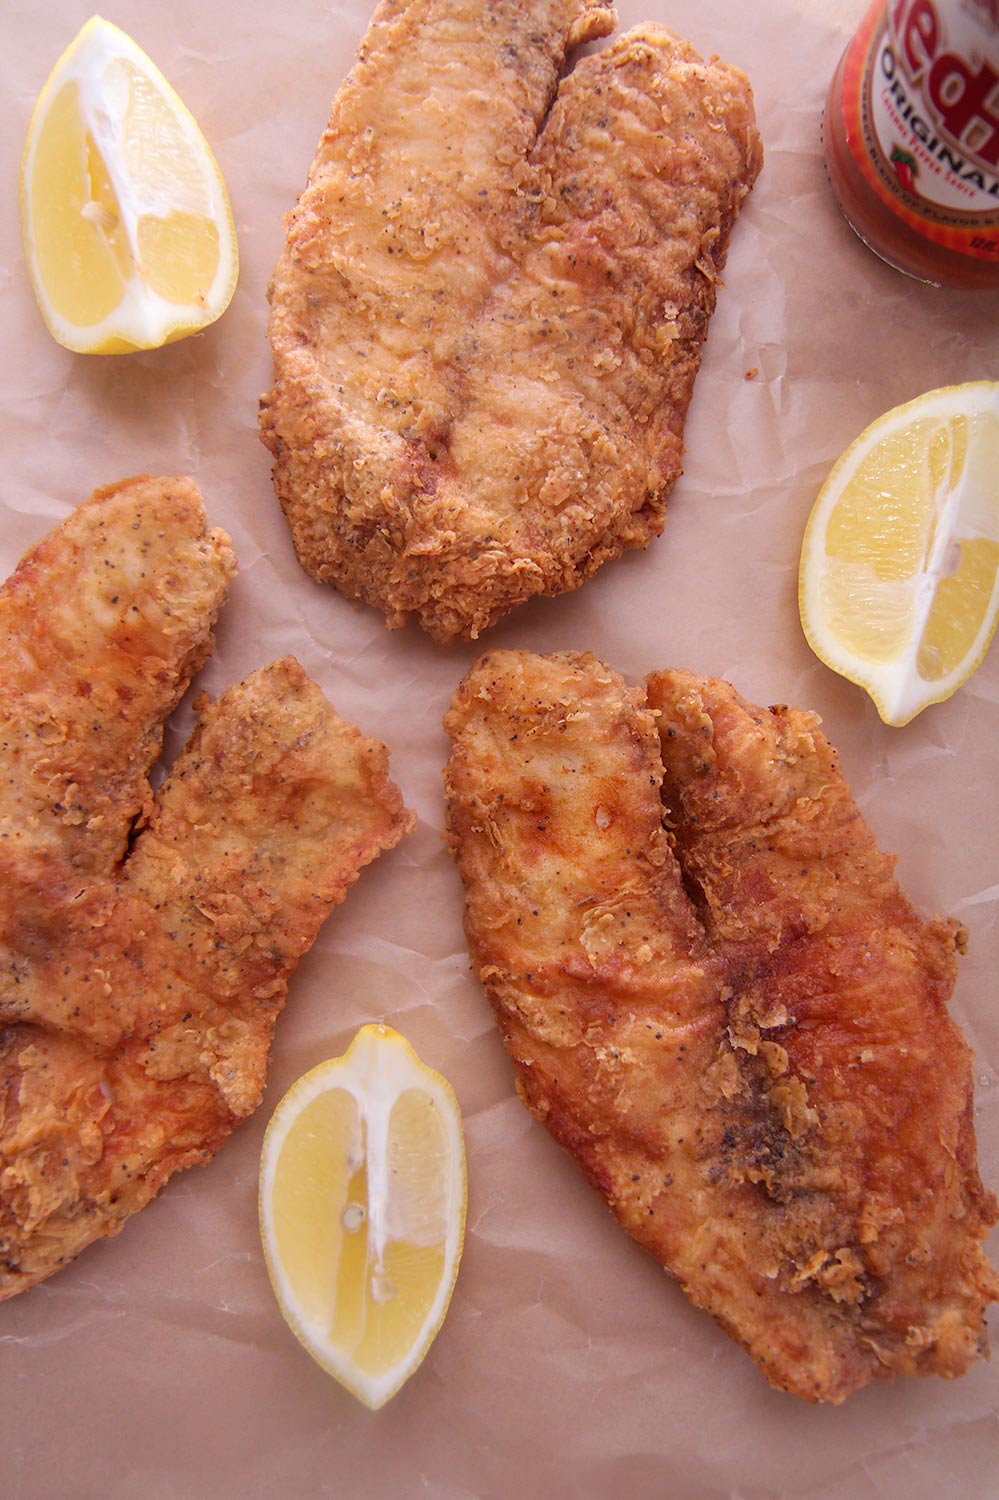 Fried Tilapia (flavorful and crunchy) + Video